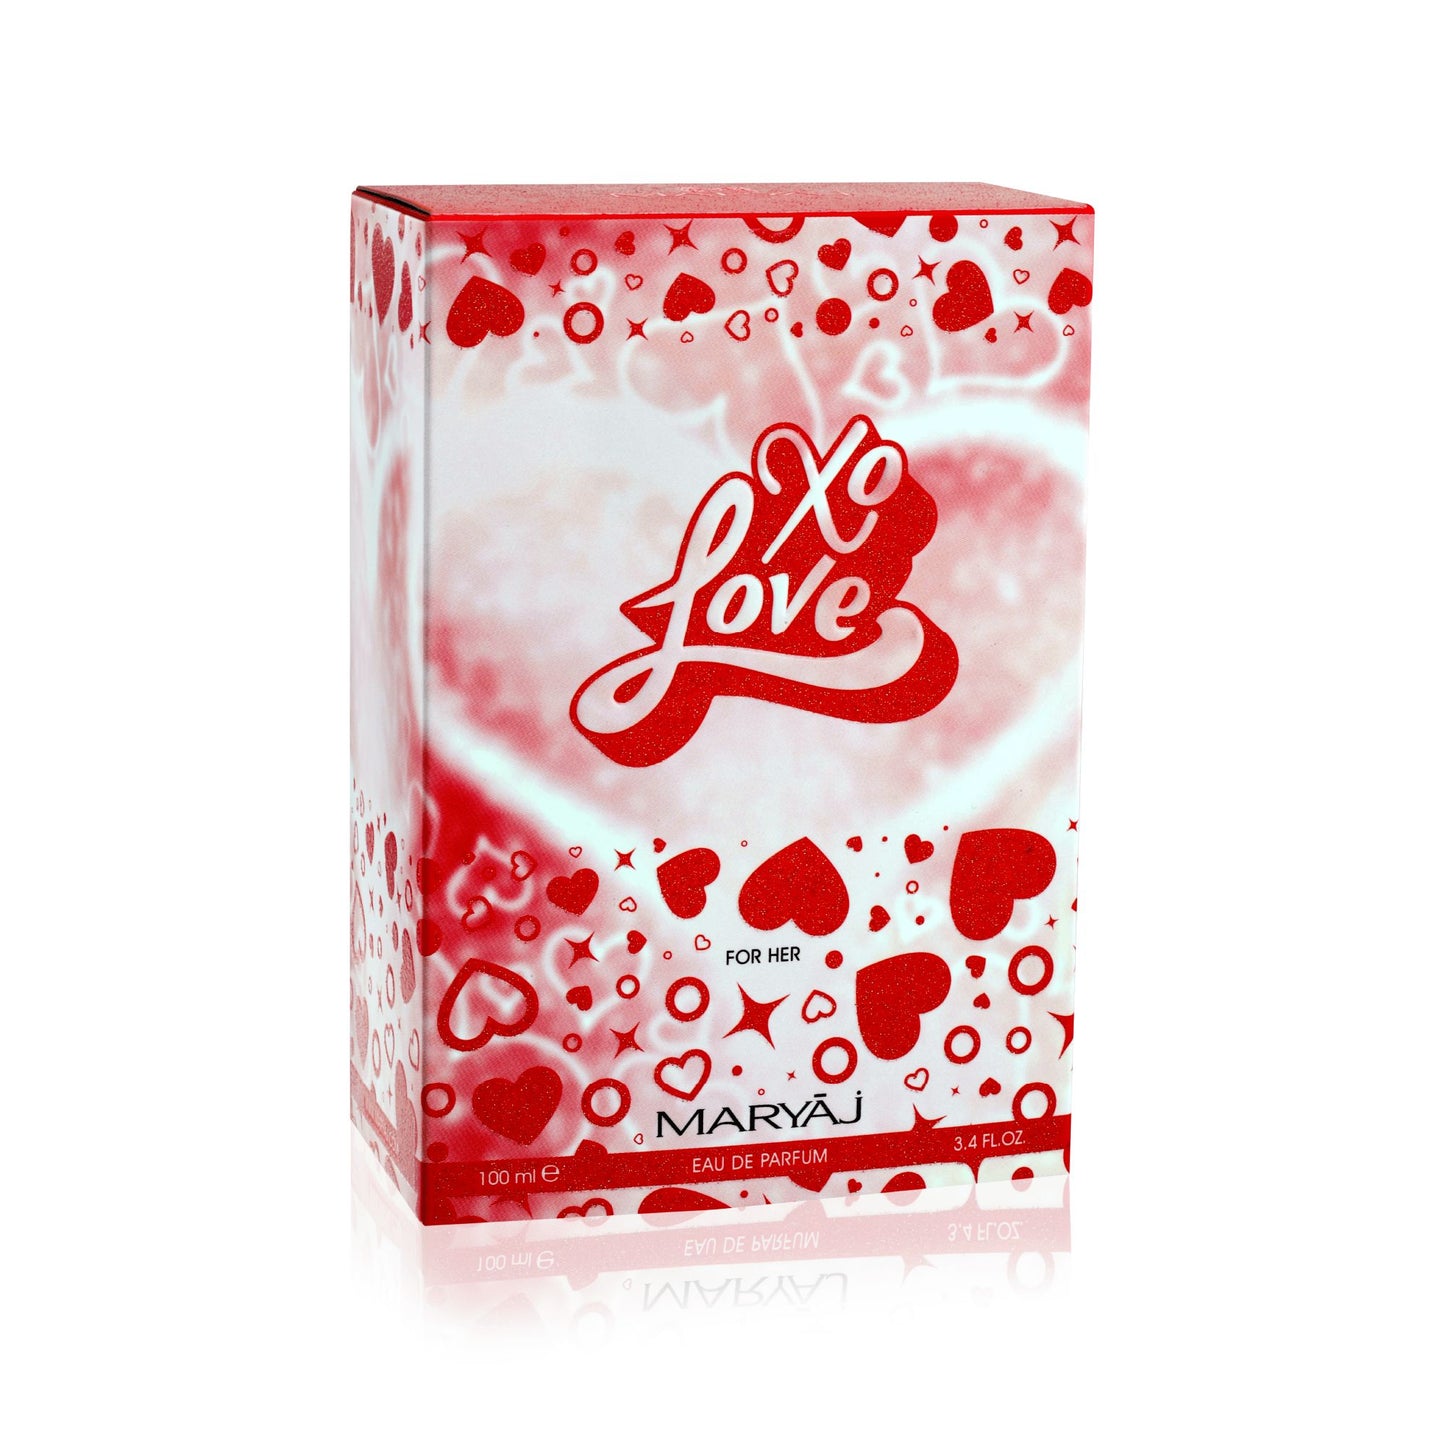 Valentine's Delight: Xo & Intrigue Combo Perfume for Womens